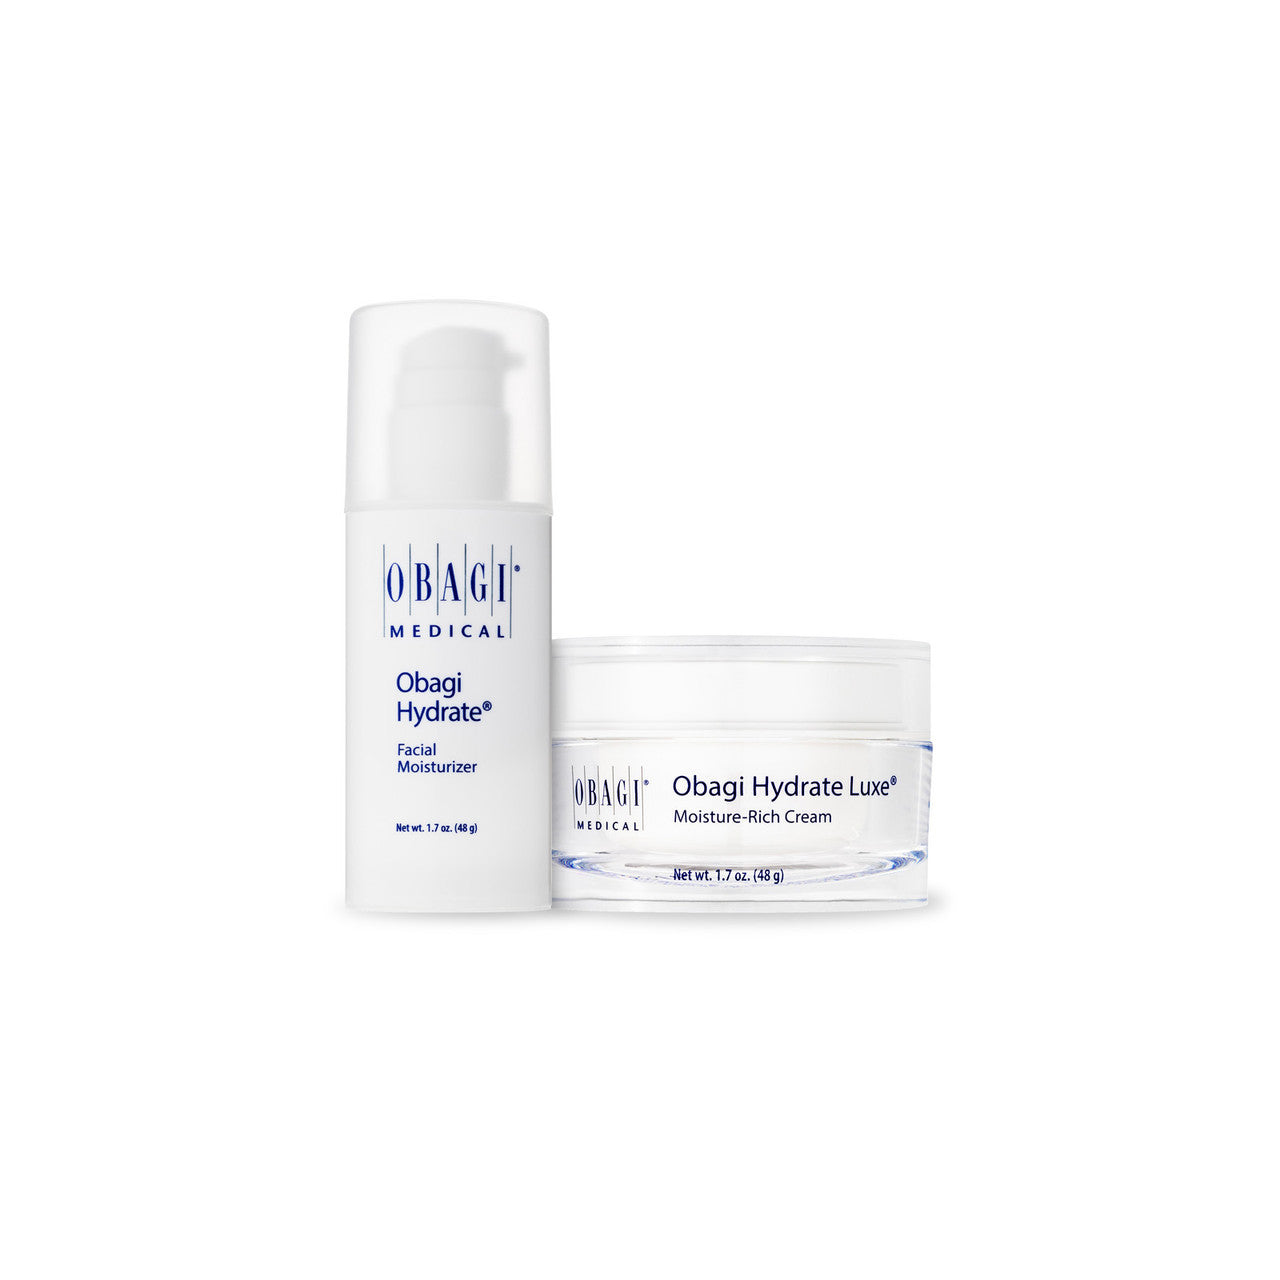 Obagi Hydrate Luxe and facial moisturizer